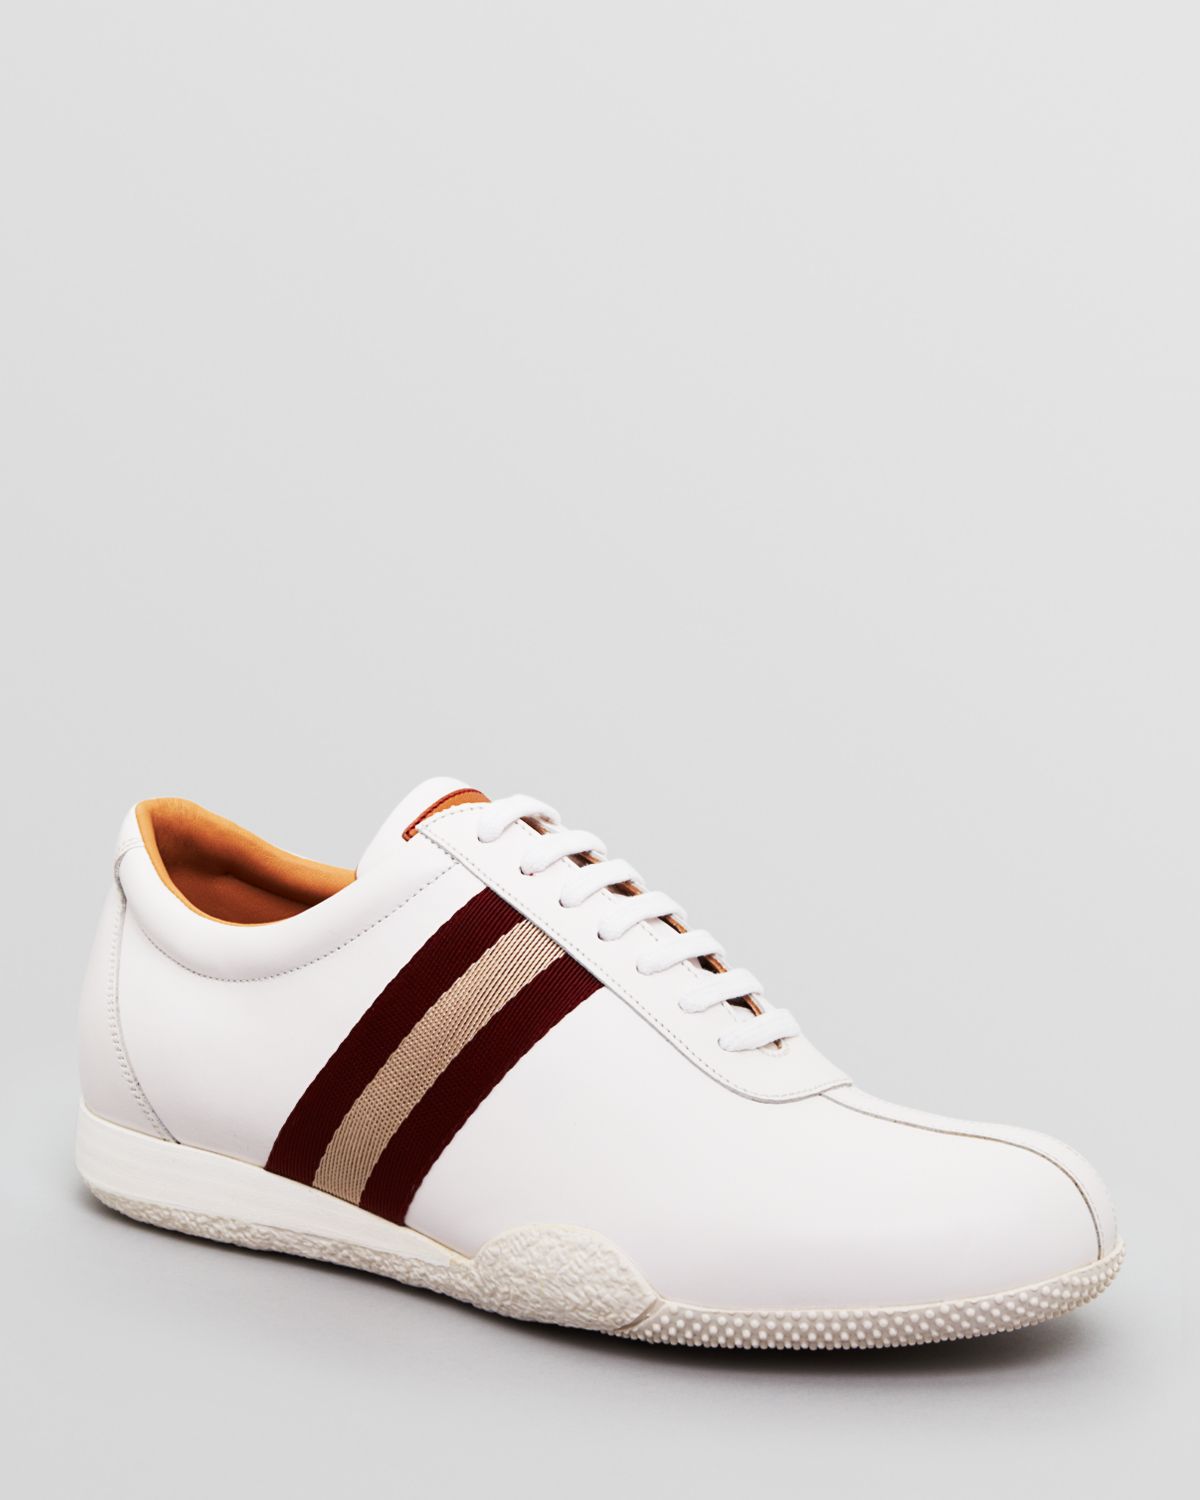 Lyst - Bally Wimbledon Sneakers in White for Men